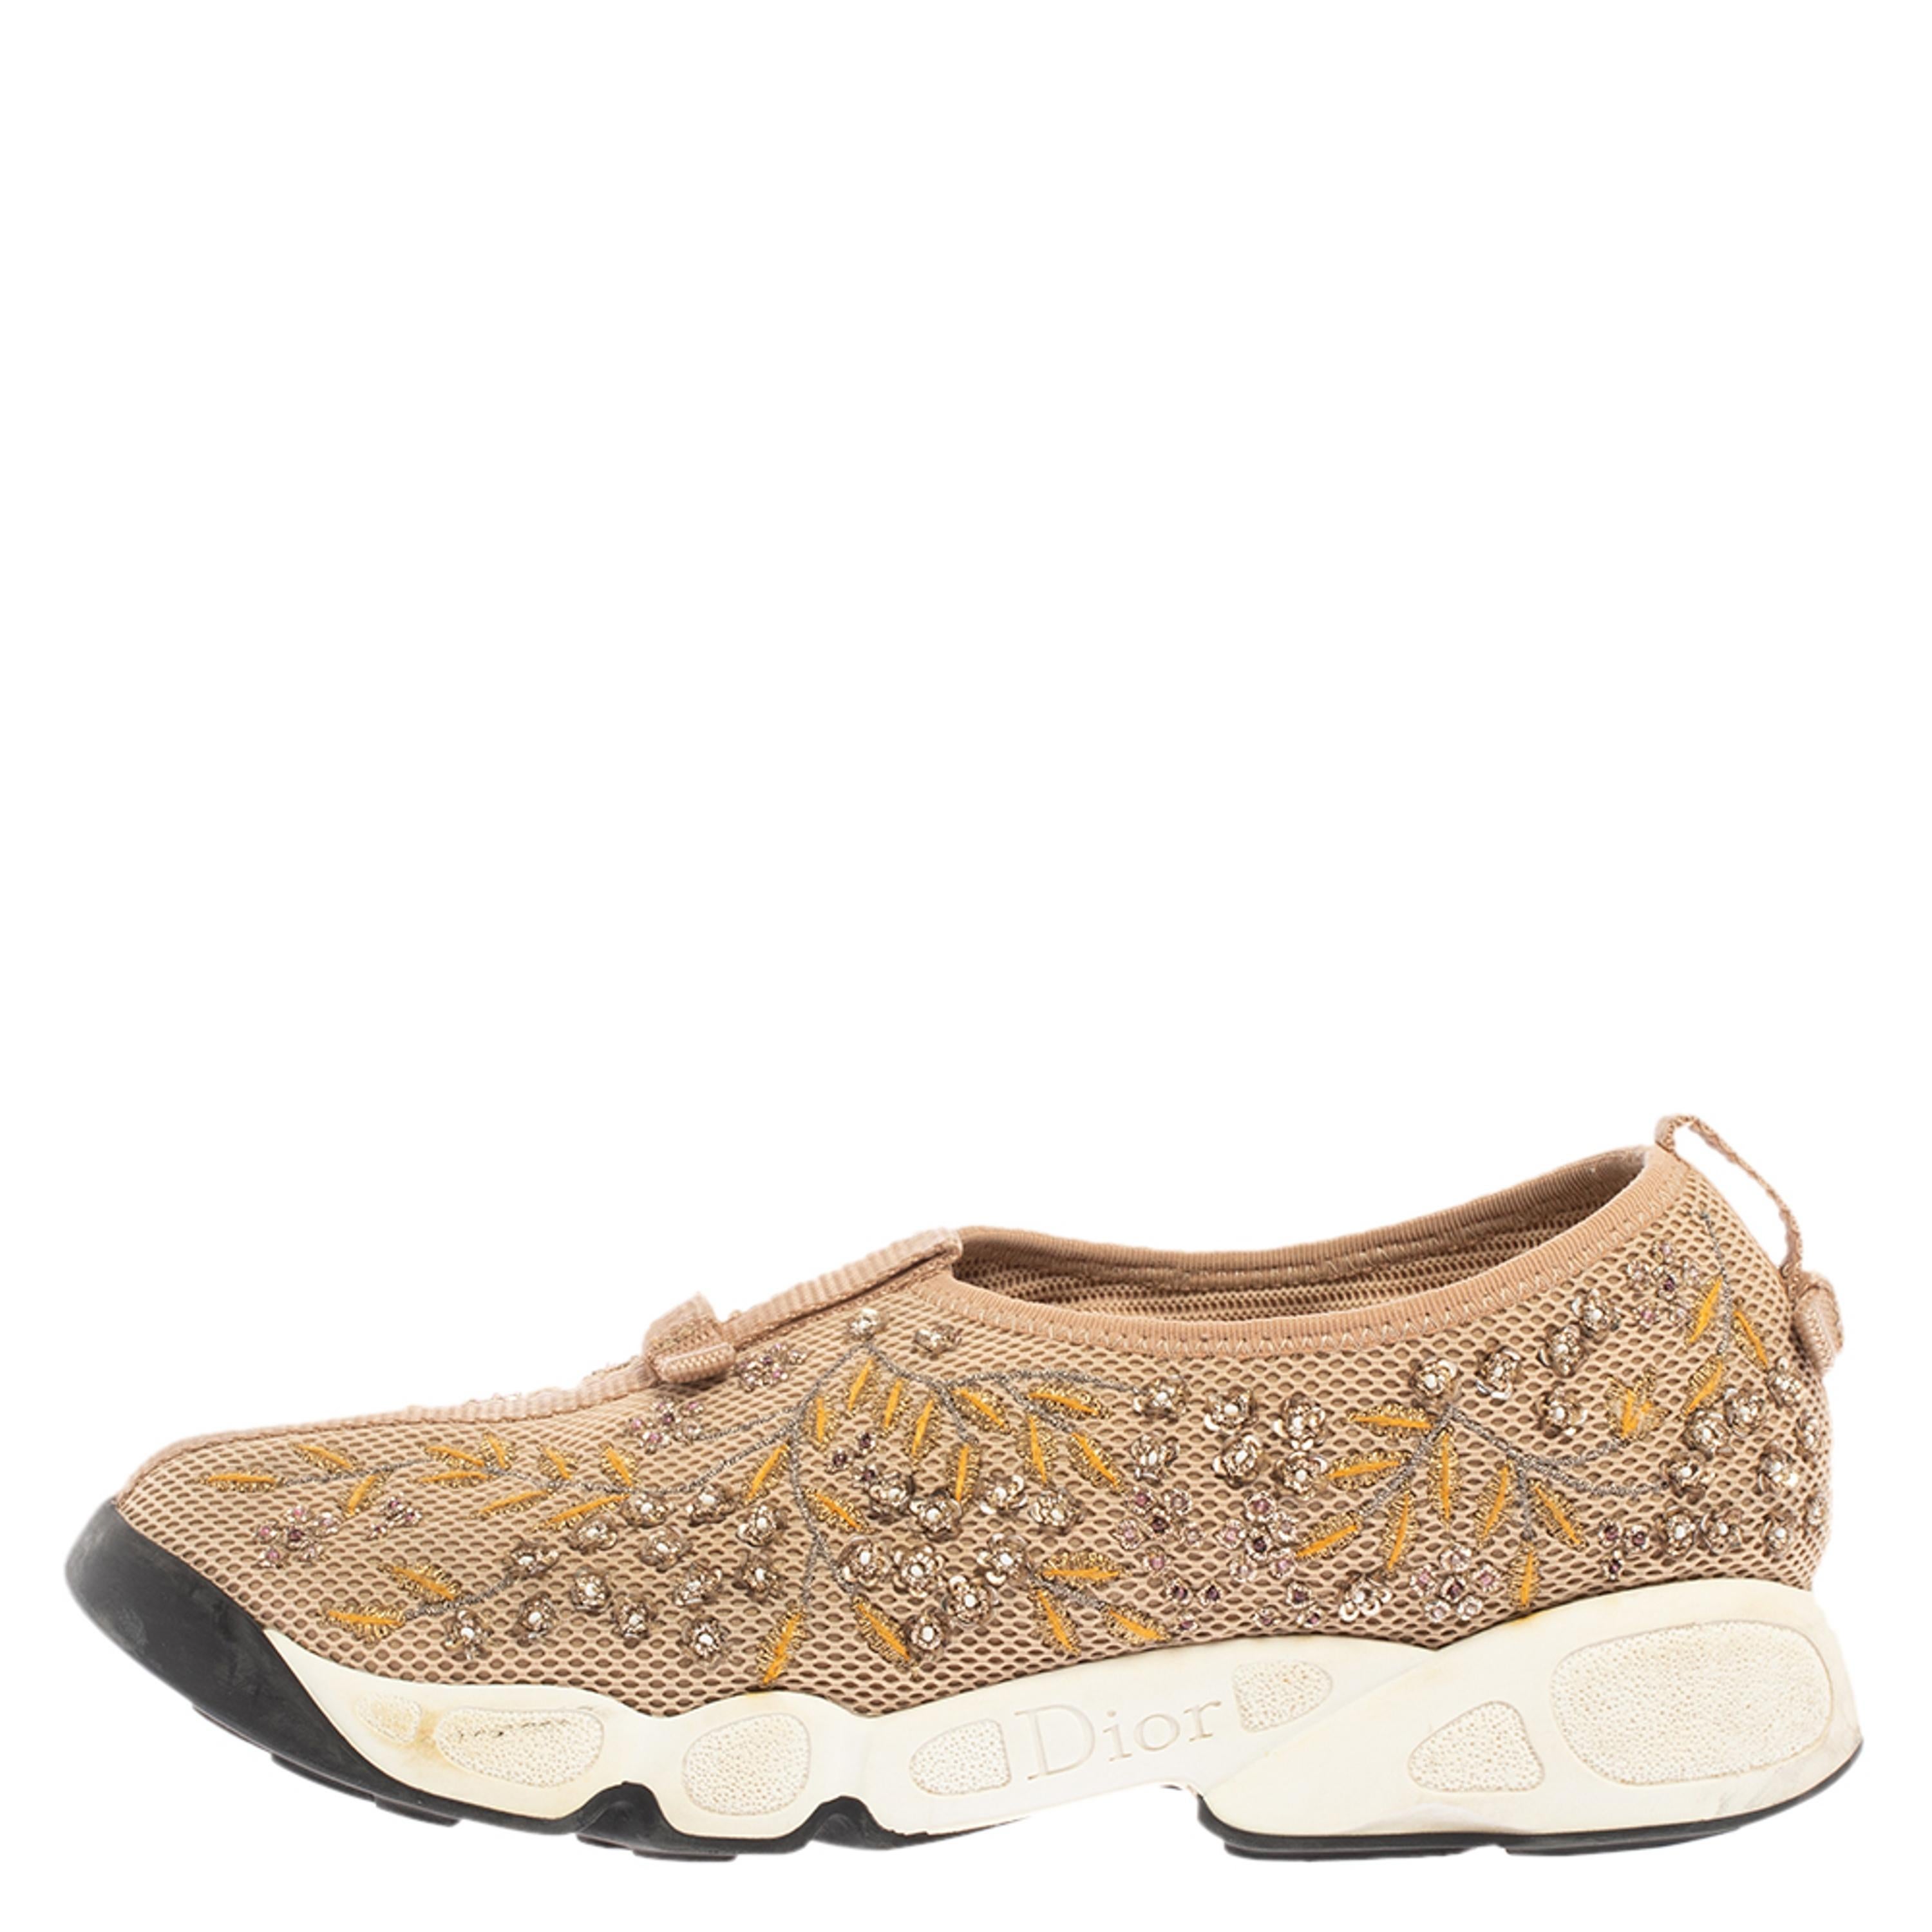 Dior Beige Mesh Fusion Floral Embellished And Embroidered Sneakers Size 38.5 4